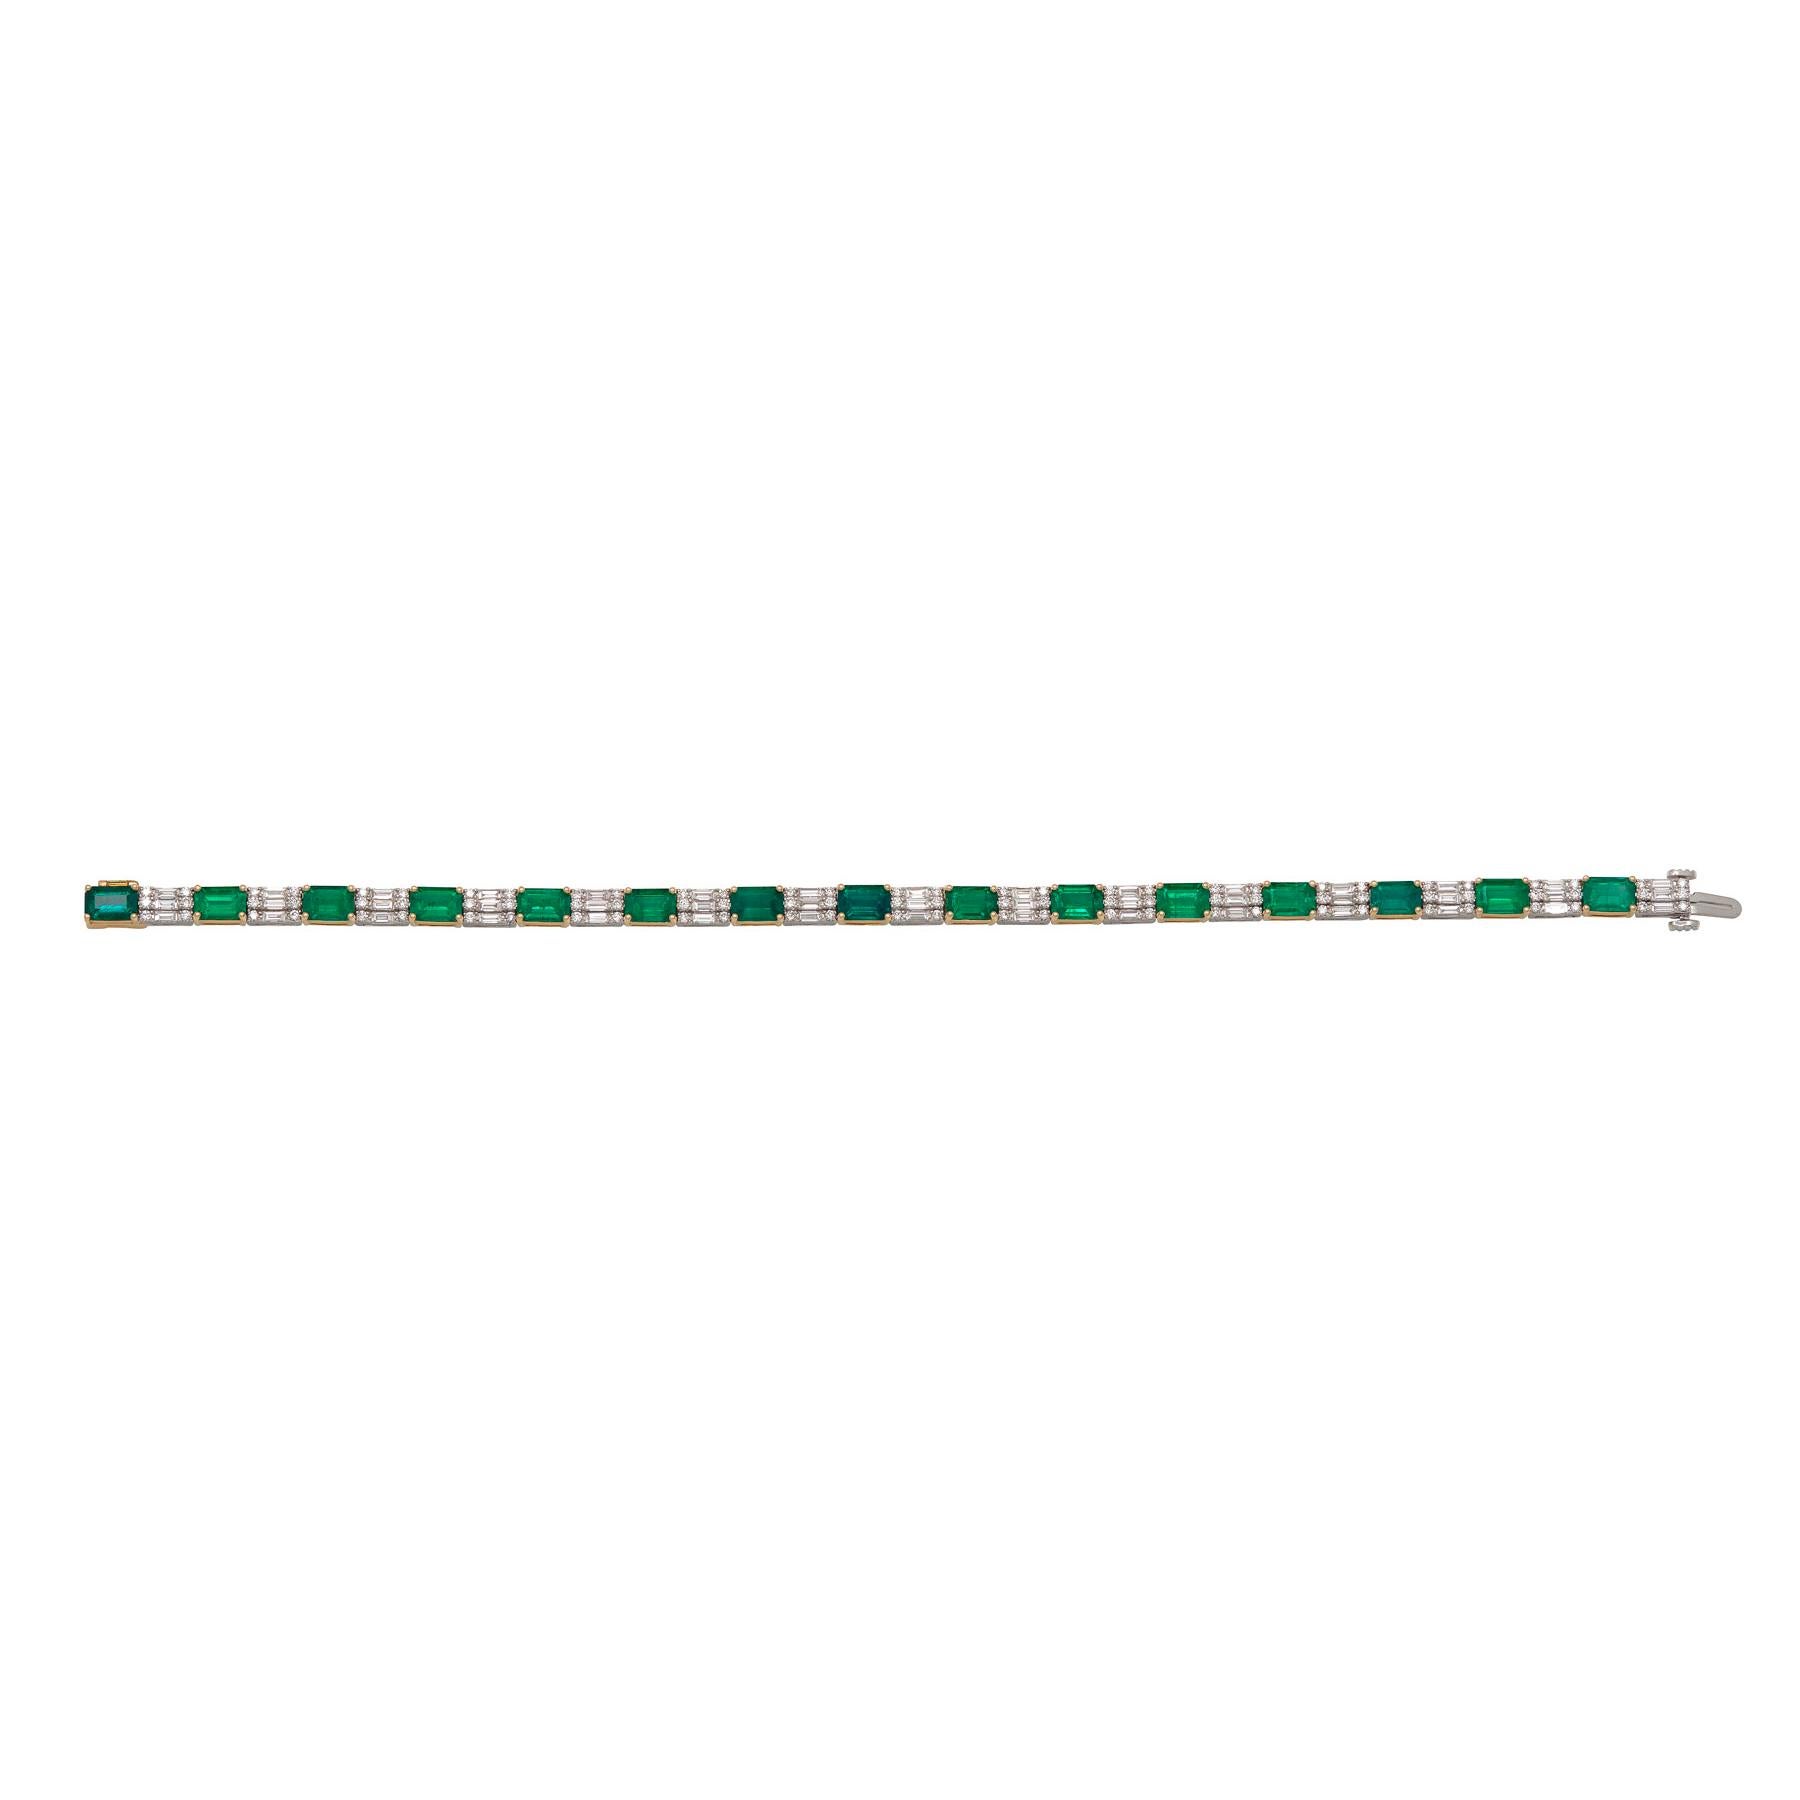 18K White and Yellow Gold
Emerald: 7.68ct total weight.
Diamond: 2.41ct total weight.
All diamonds are G-H/ SI stones.
